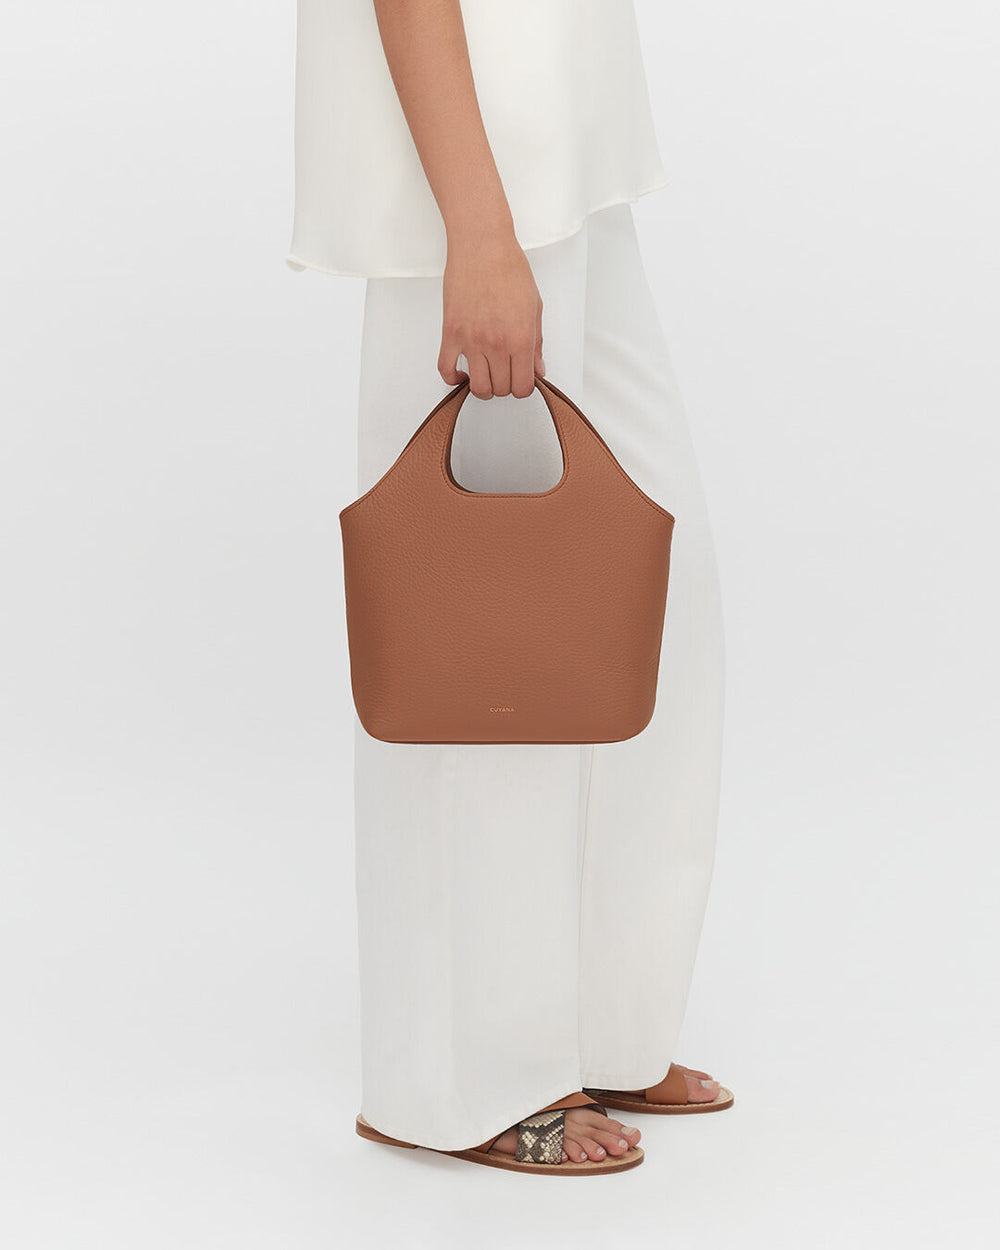 Person standing and holding a handbag while wearing pants and sandals.